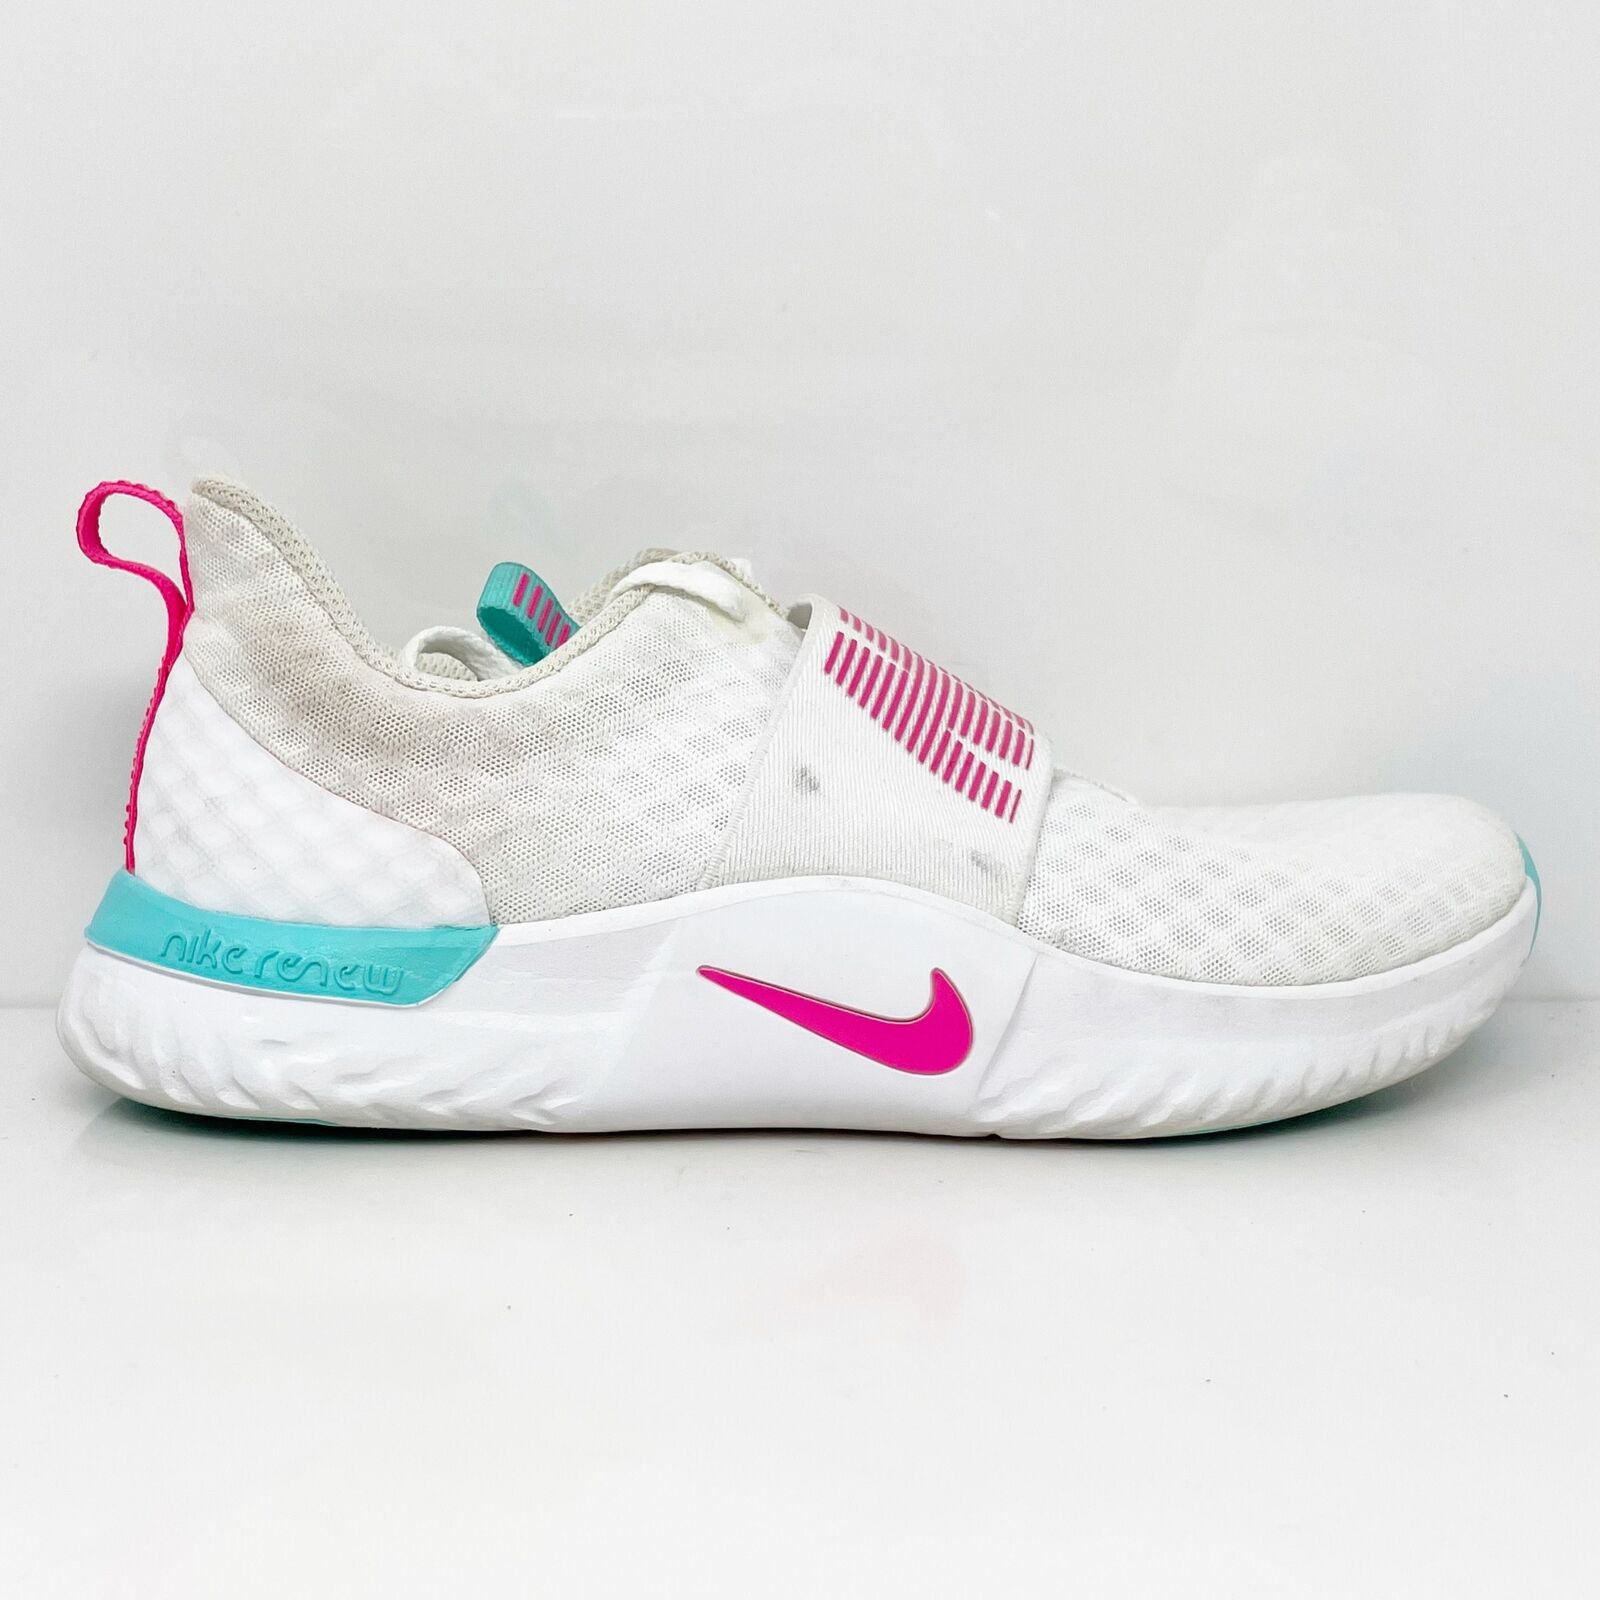 Nike Womens Renew In CW7022-100 White Shoes Sneakers Size 8 | eBay